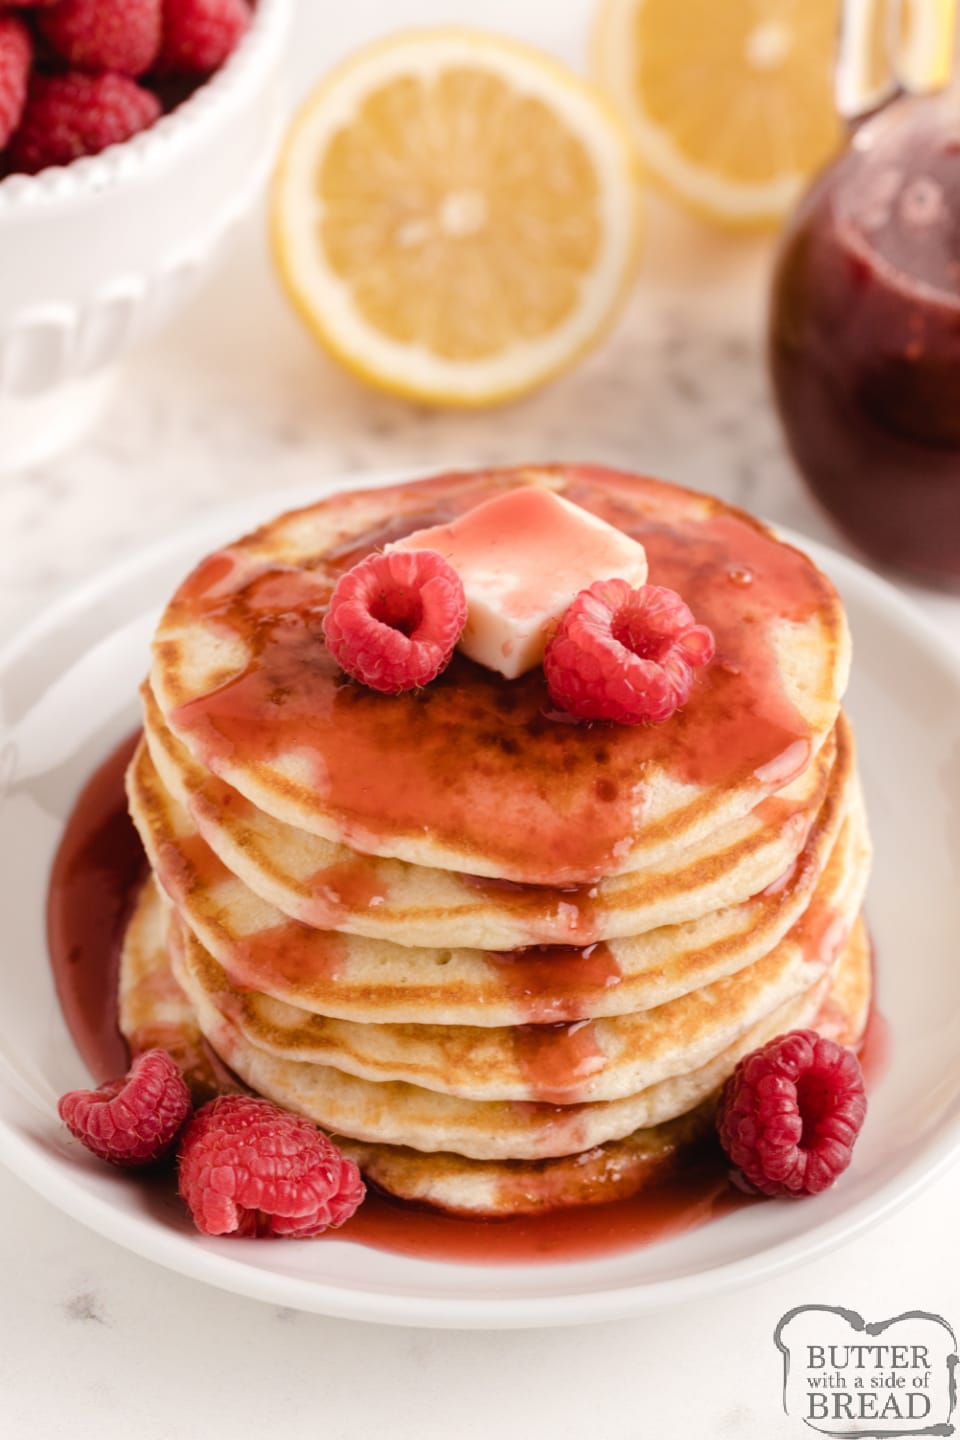 Lemon Pancakes with Raspberry Syrup are light and fluffy with a subtle lemon flavor. Top with a simple two-ingredient raspberry syrup made with frozen raspberries for a delicious pancake breakfast.